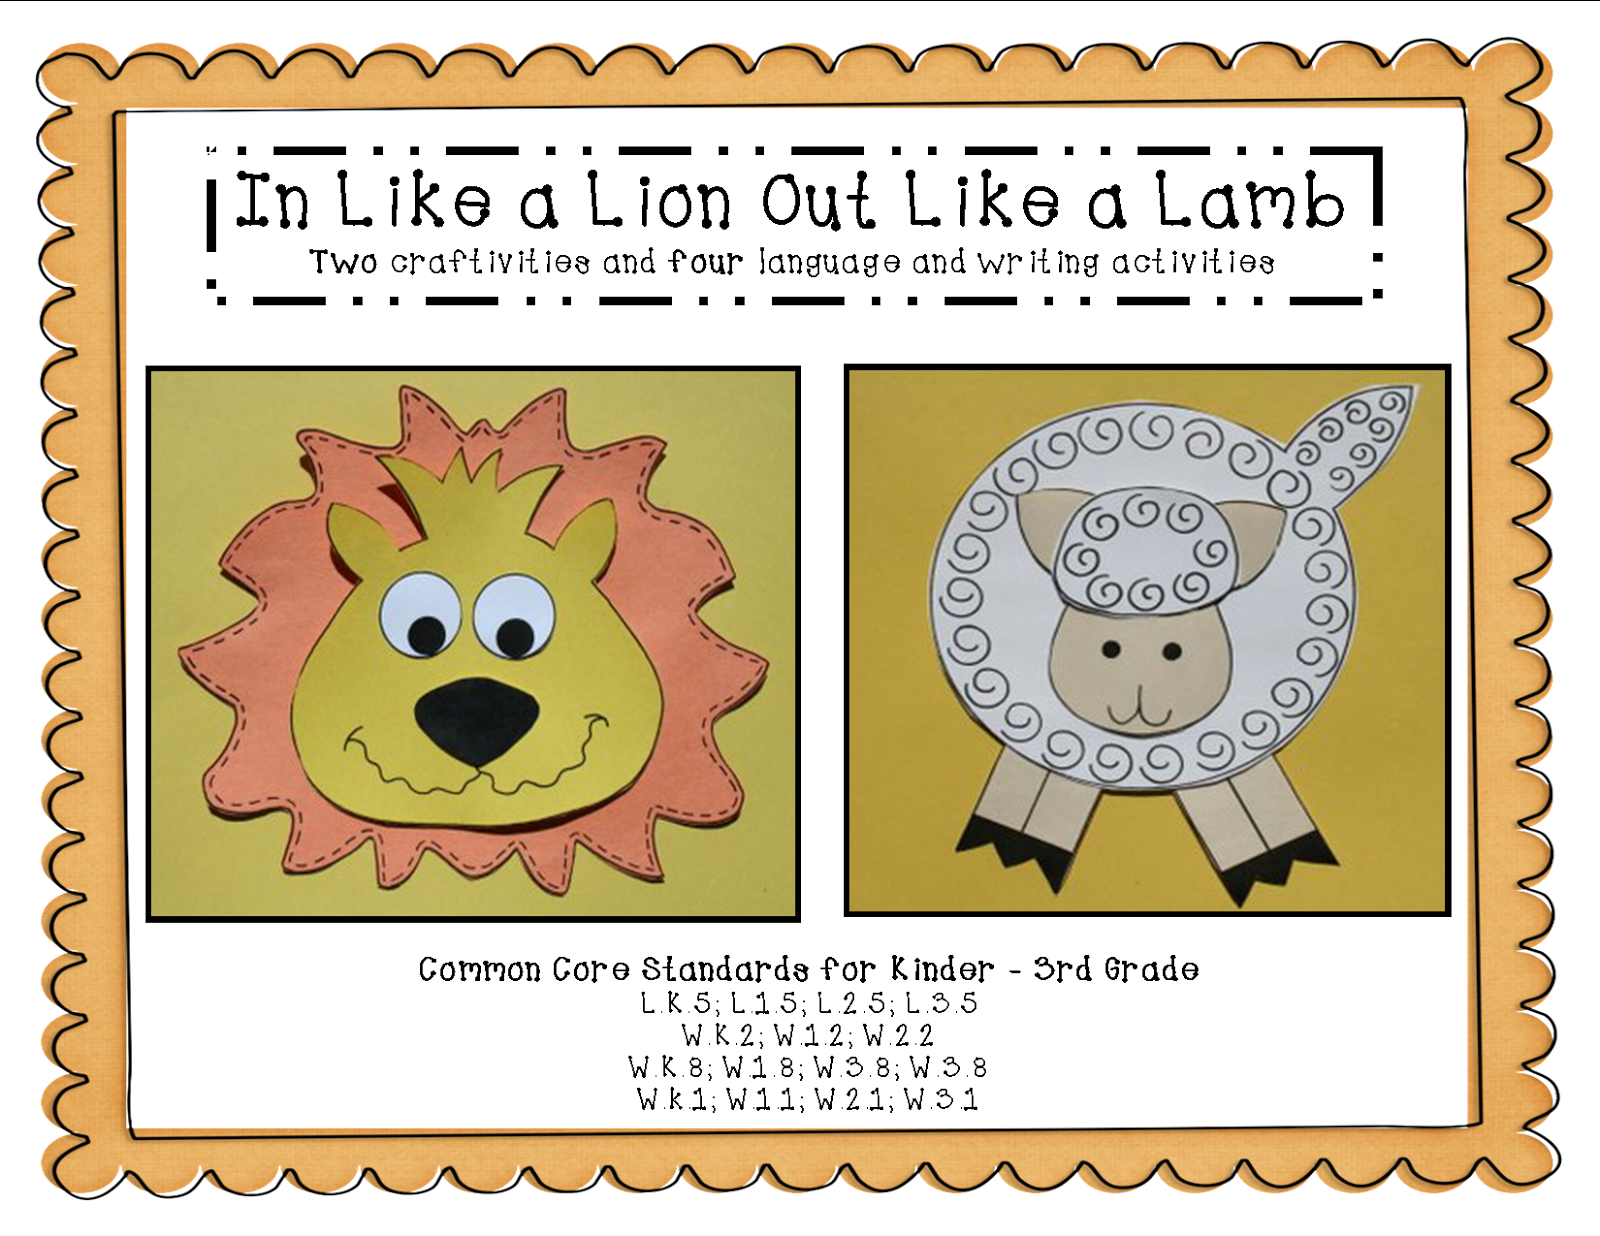 http://www.teacherspayteachers.com/Product/In-Like-a-Lion-Out-Like-a-Lamb-Craftivity-and-Four-Language-Arts-Activities-1109523